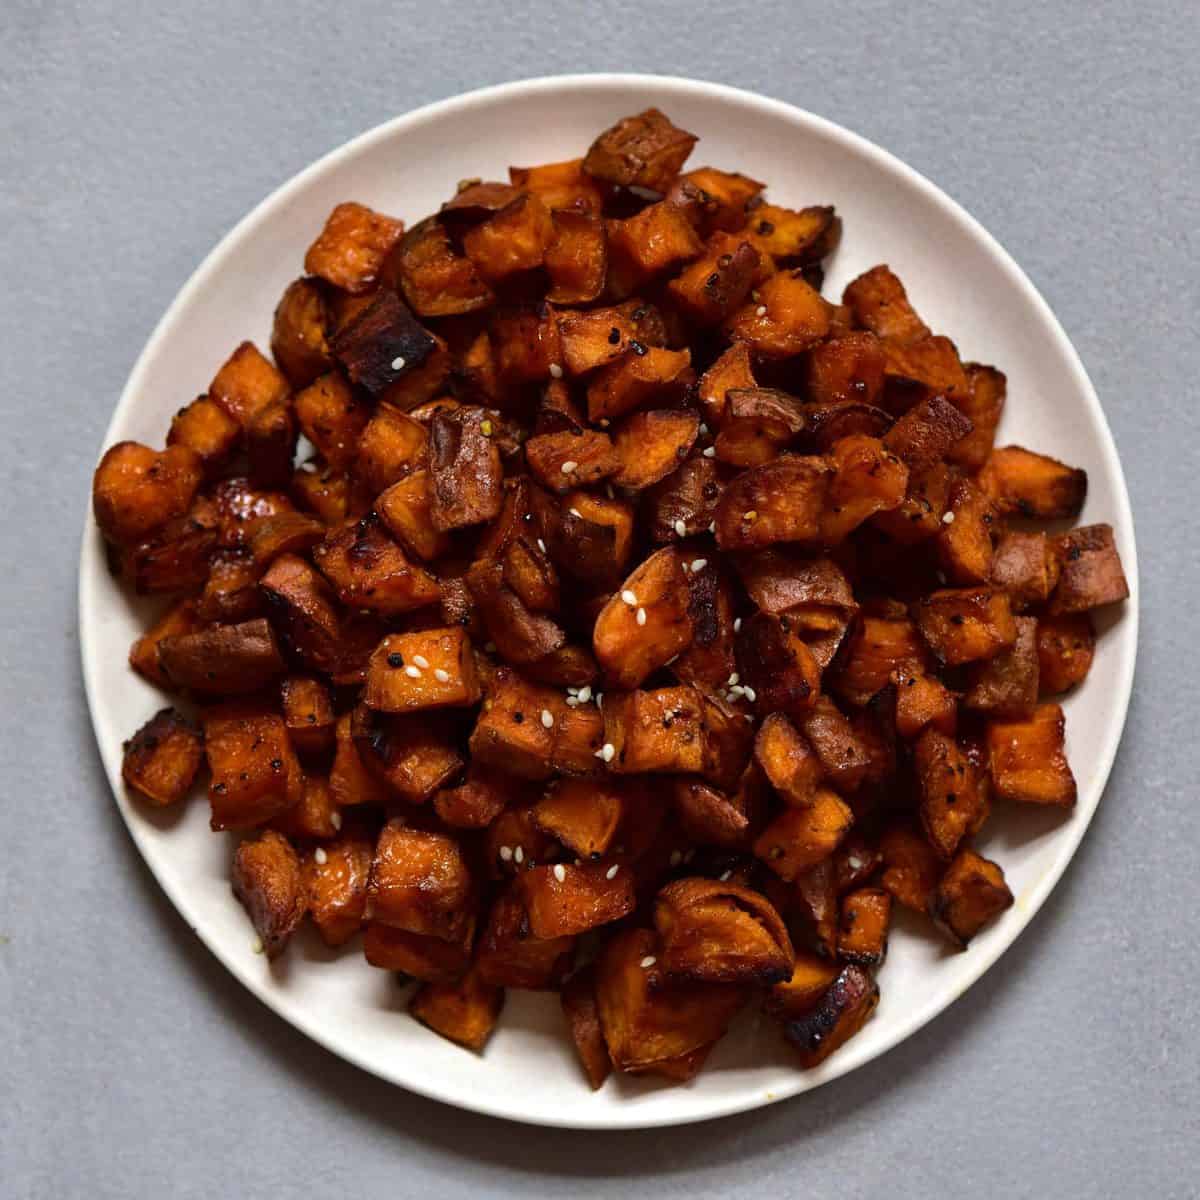 Baked sweet potato cubes on a white plate